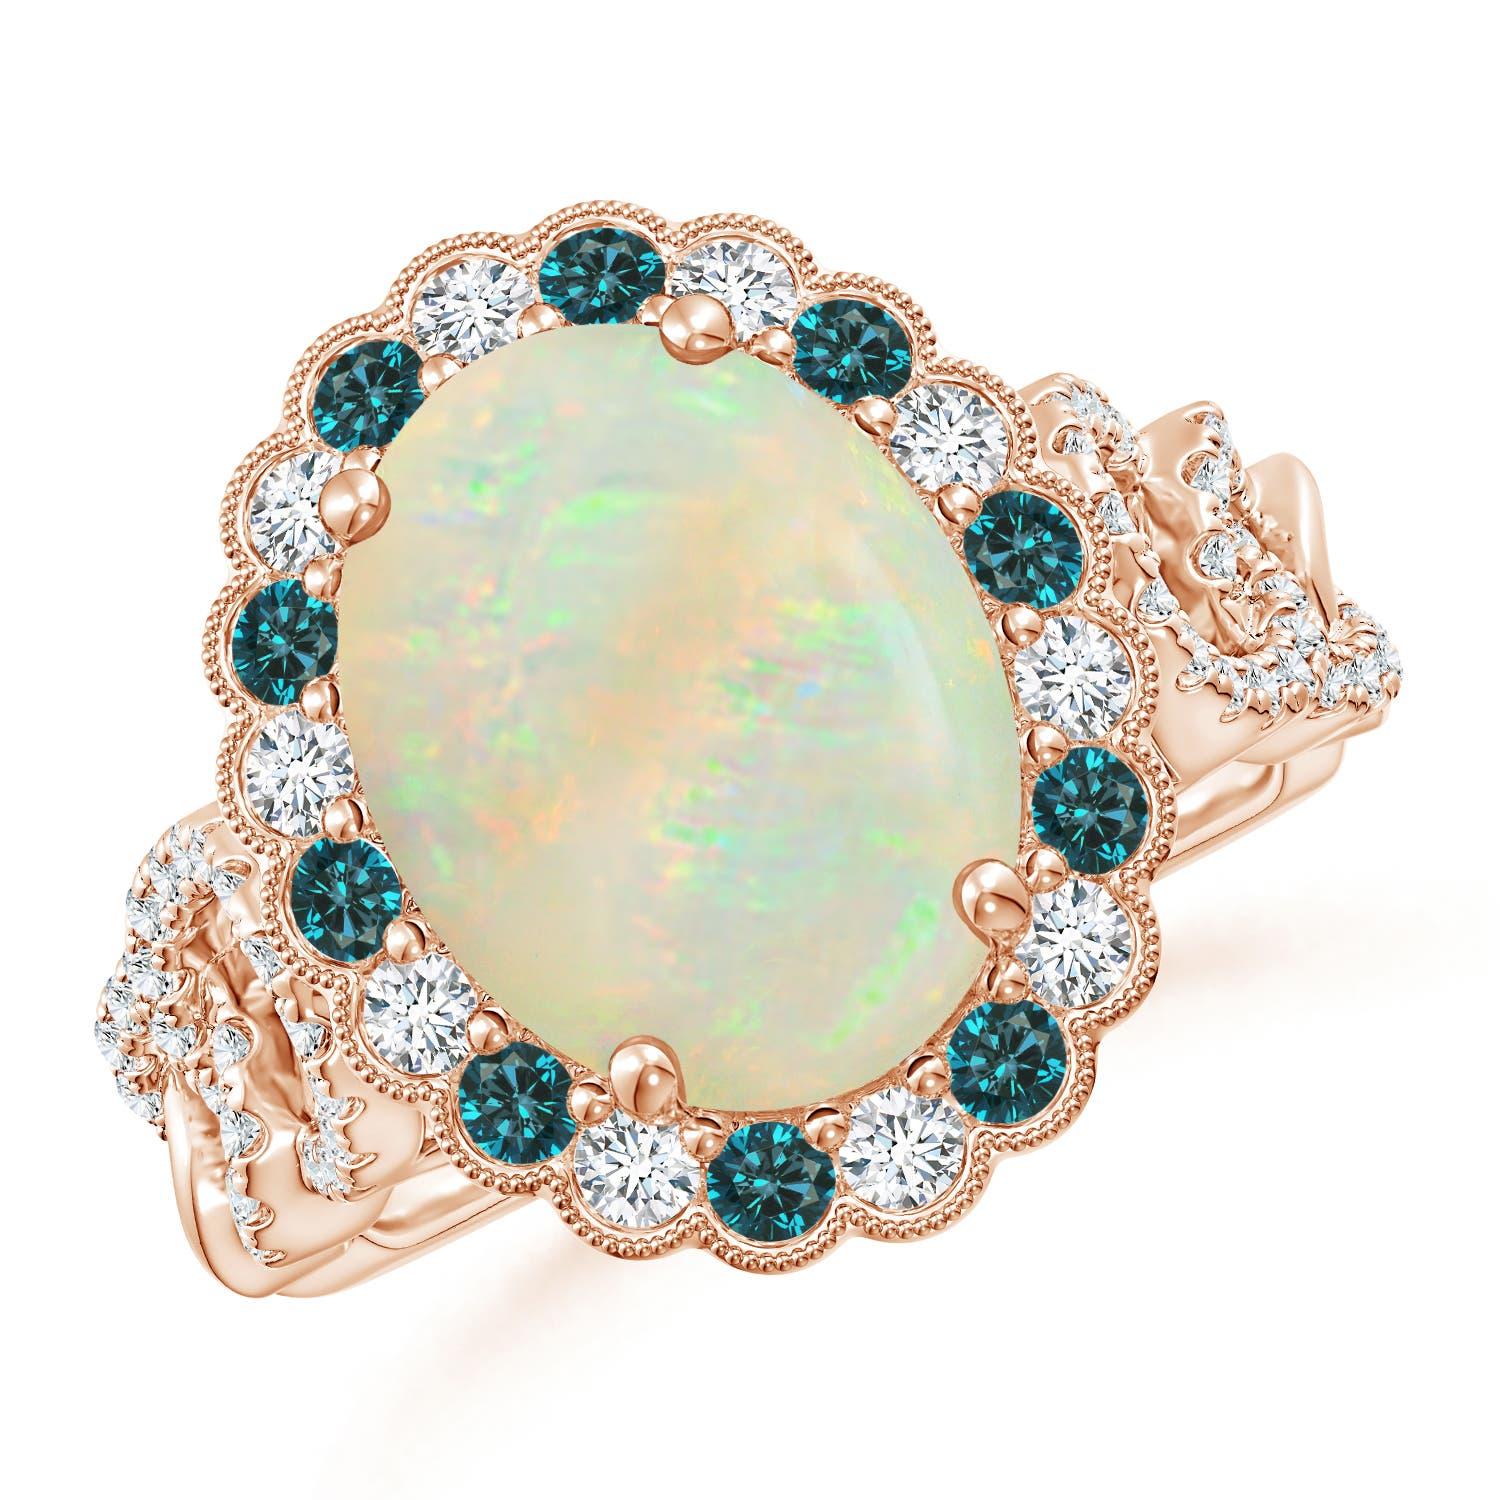 For Sale:  Angara Gia Certified Natural Opal Ring in Rose Gold with Blue & White Diamonds